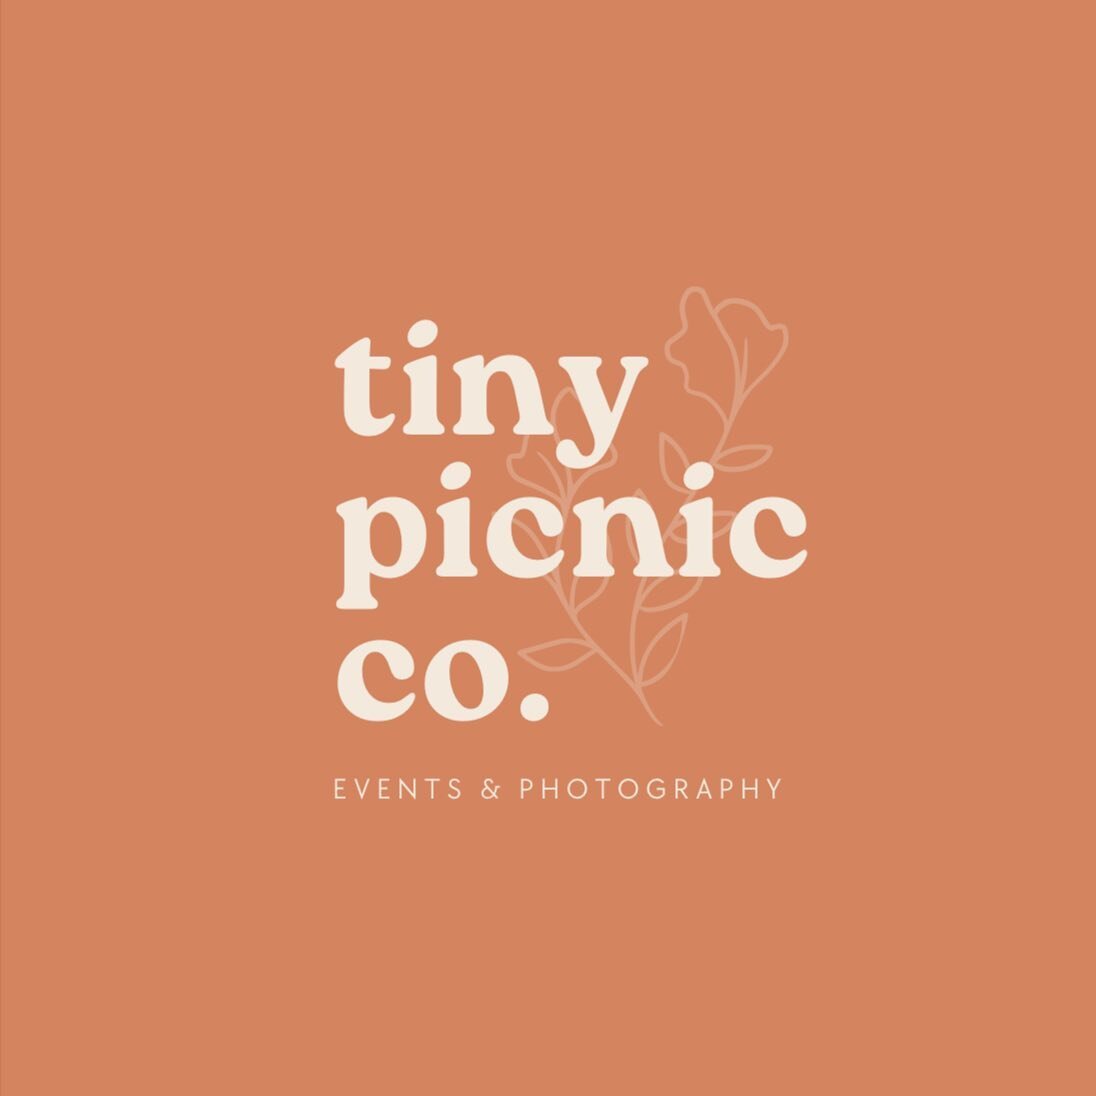 So excited to announce our new tiny adventure! @tinypicniccompany 💕🧺☀️📸 We specialize in tiny bespoke events throughout the Los Angeles/ South Bay Area. 

Our goal is to make luxury picnics &amp; photography affordable to everyone! Message us to b